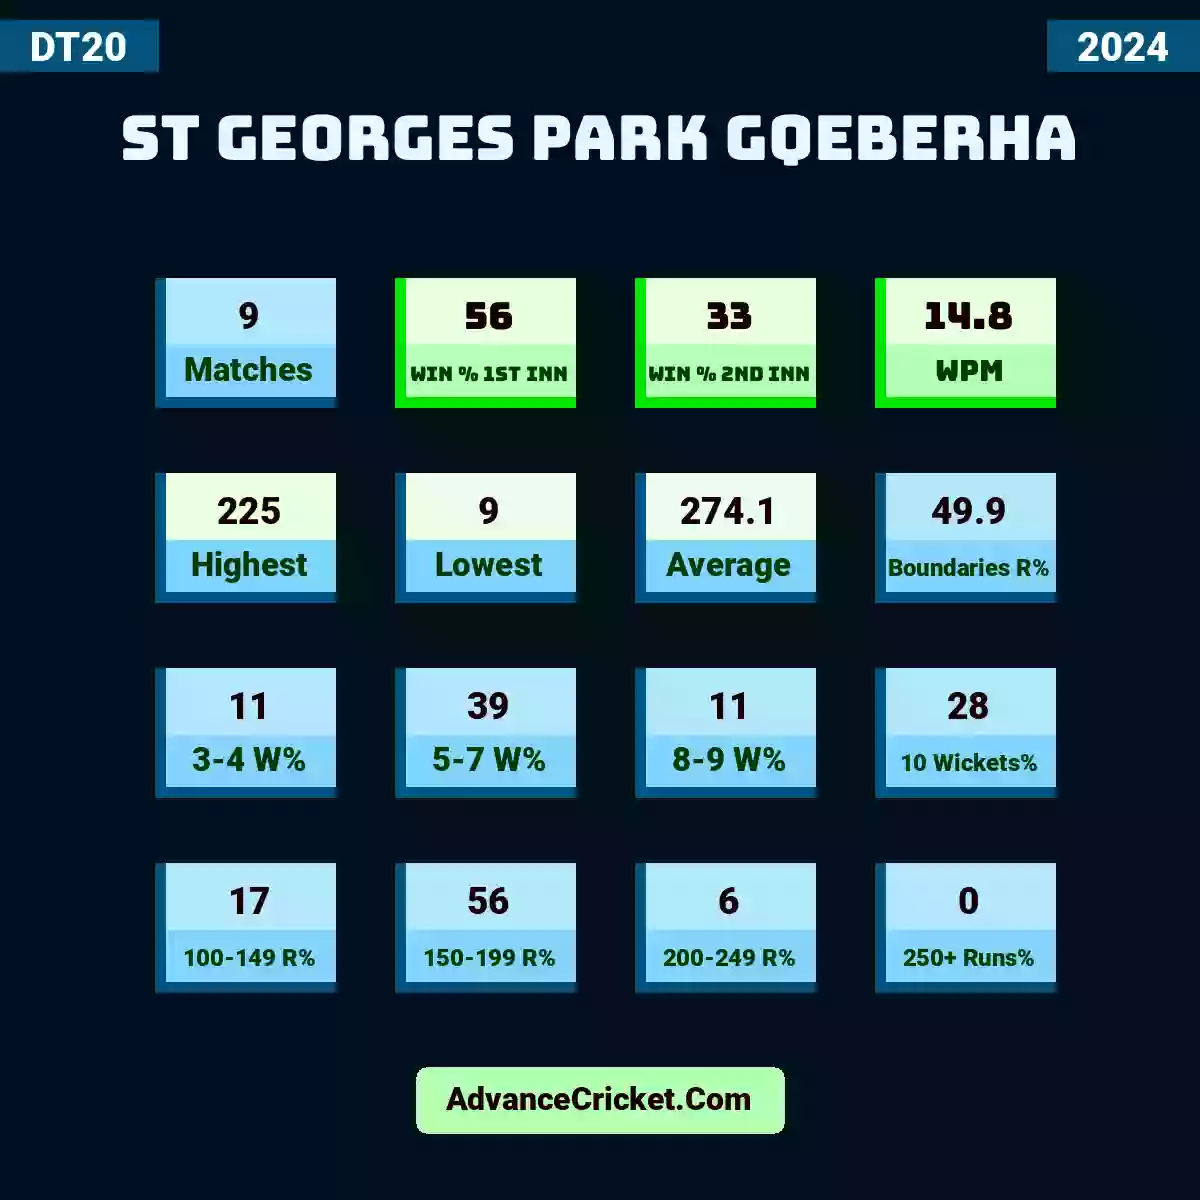 Image showing St Georges Park Gqeberha DT20 2024 with Matches: 9, Win % 1st Inn: 56, Win % 2nd Inn: 33, WPM: 14.8, Highest: 225, Lowest: 9, Average: 274.1, Boundaries R%: 49.9, 3-4 W%: 11, 5-7 W%: 39, 8-9 W%: 11, 10 Wickets%: 28, 100-149 R%: 17, 150-199 R%: 56, 200-249 R%: 6, 250+ Runs%: 0.